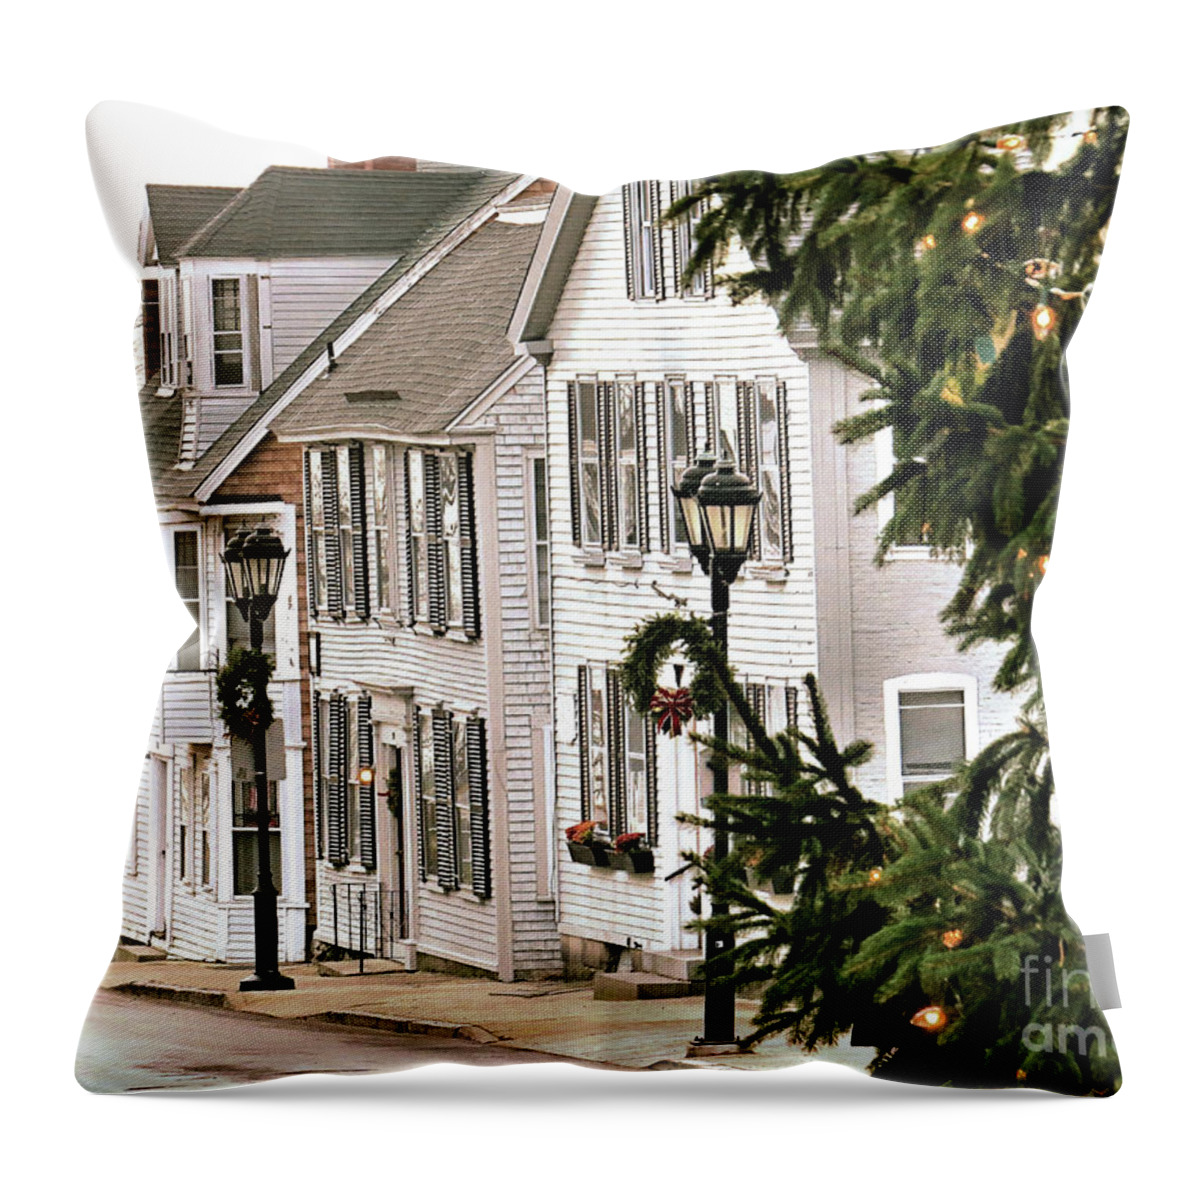 First Street Throw Pillow featuring the photograph Leyden Street by Janice Drew